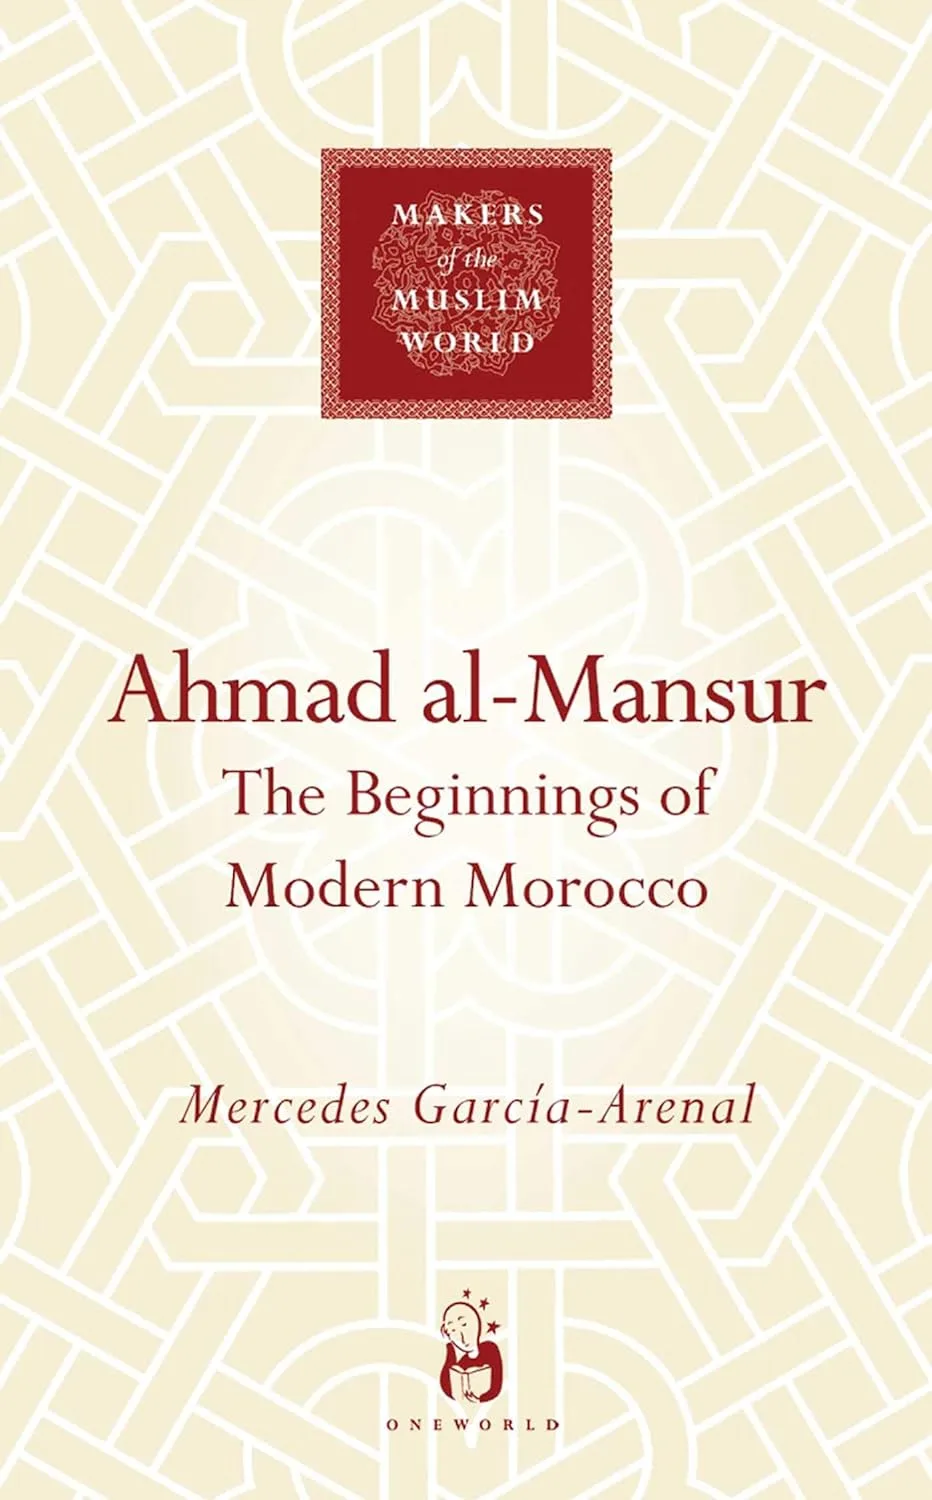 Ahmad al-Mansur: The Beginnings of Modern Morocco (Makers of the Muslim World) by Mercedes Garcia-Arenal